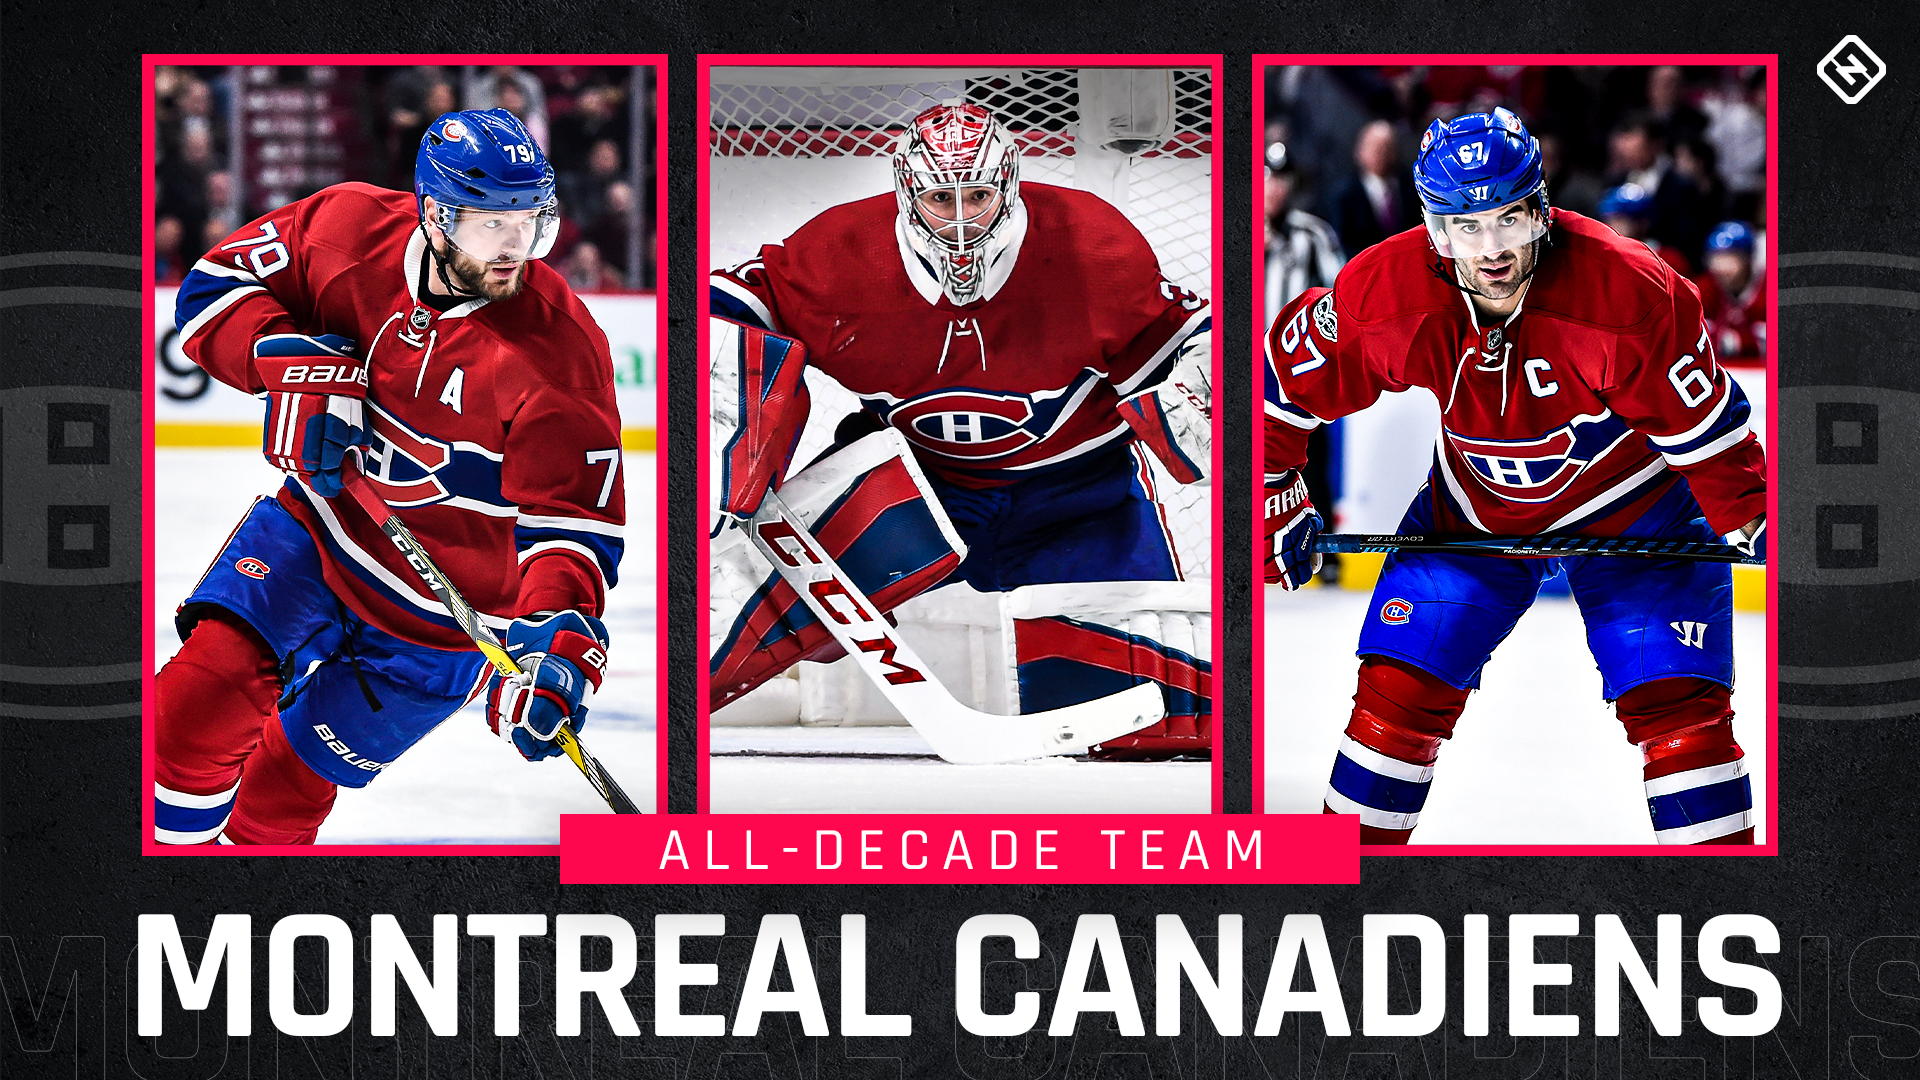 nhl montreal canadiens